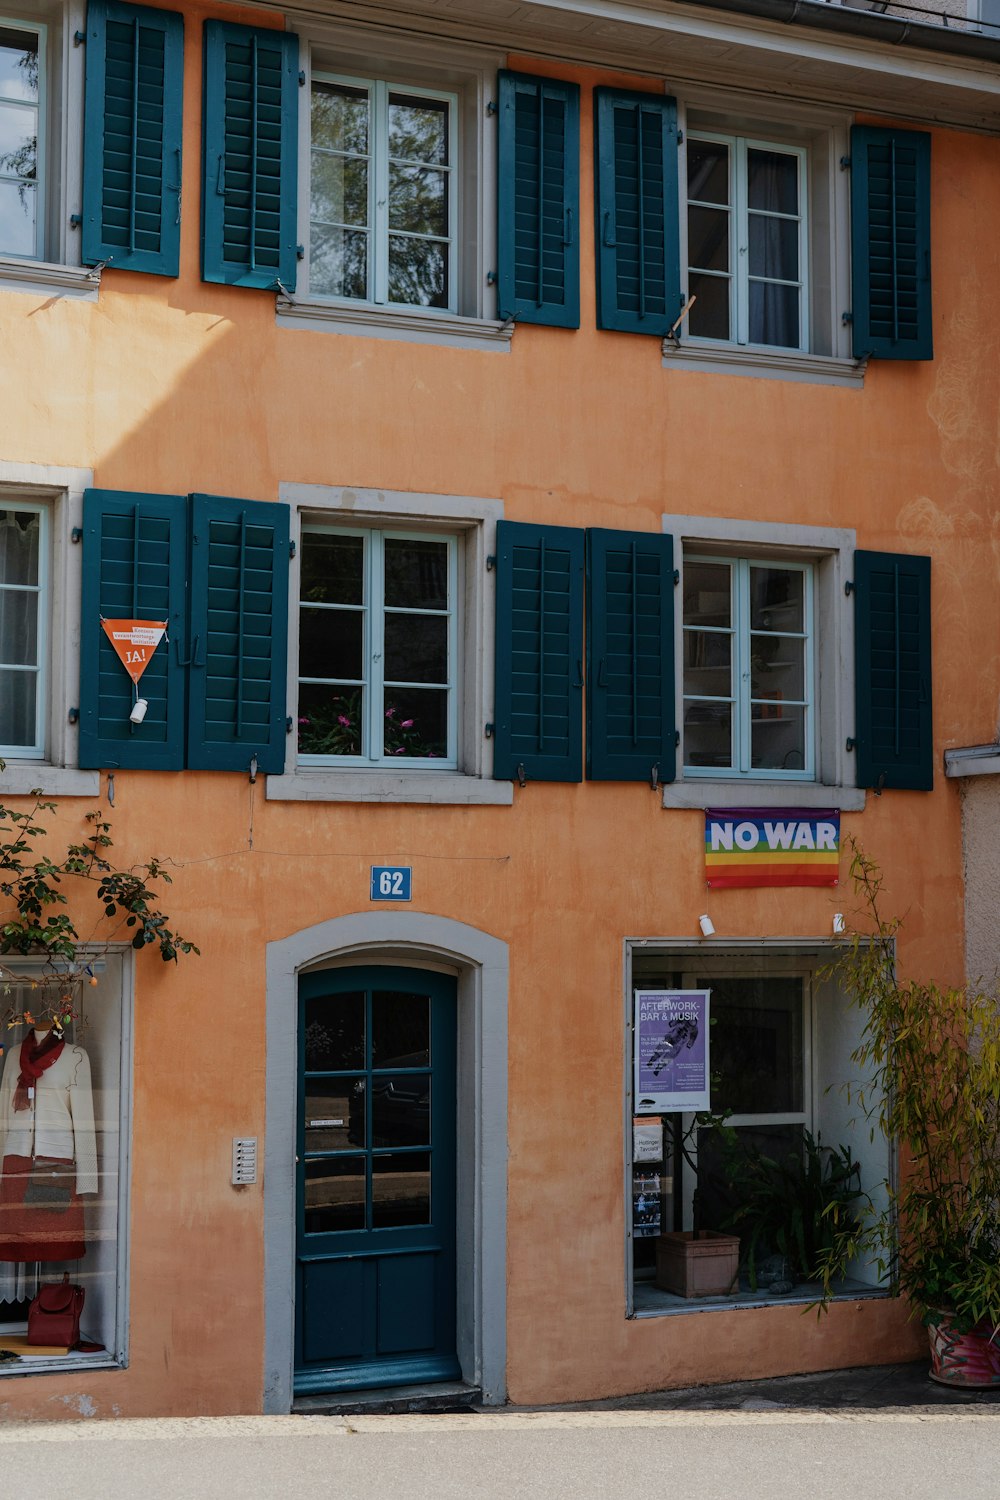 an orange building with green shutters and a no war sign